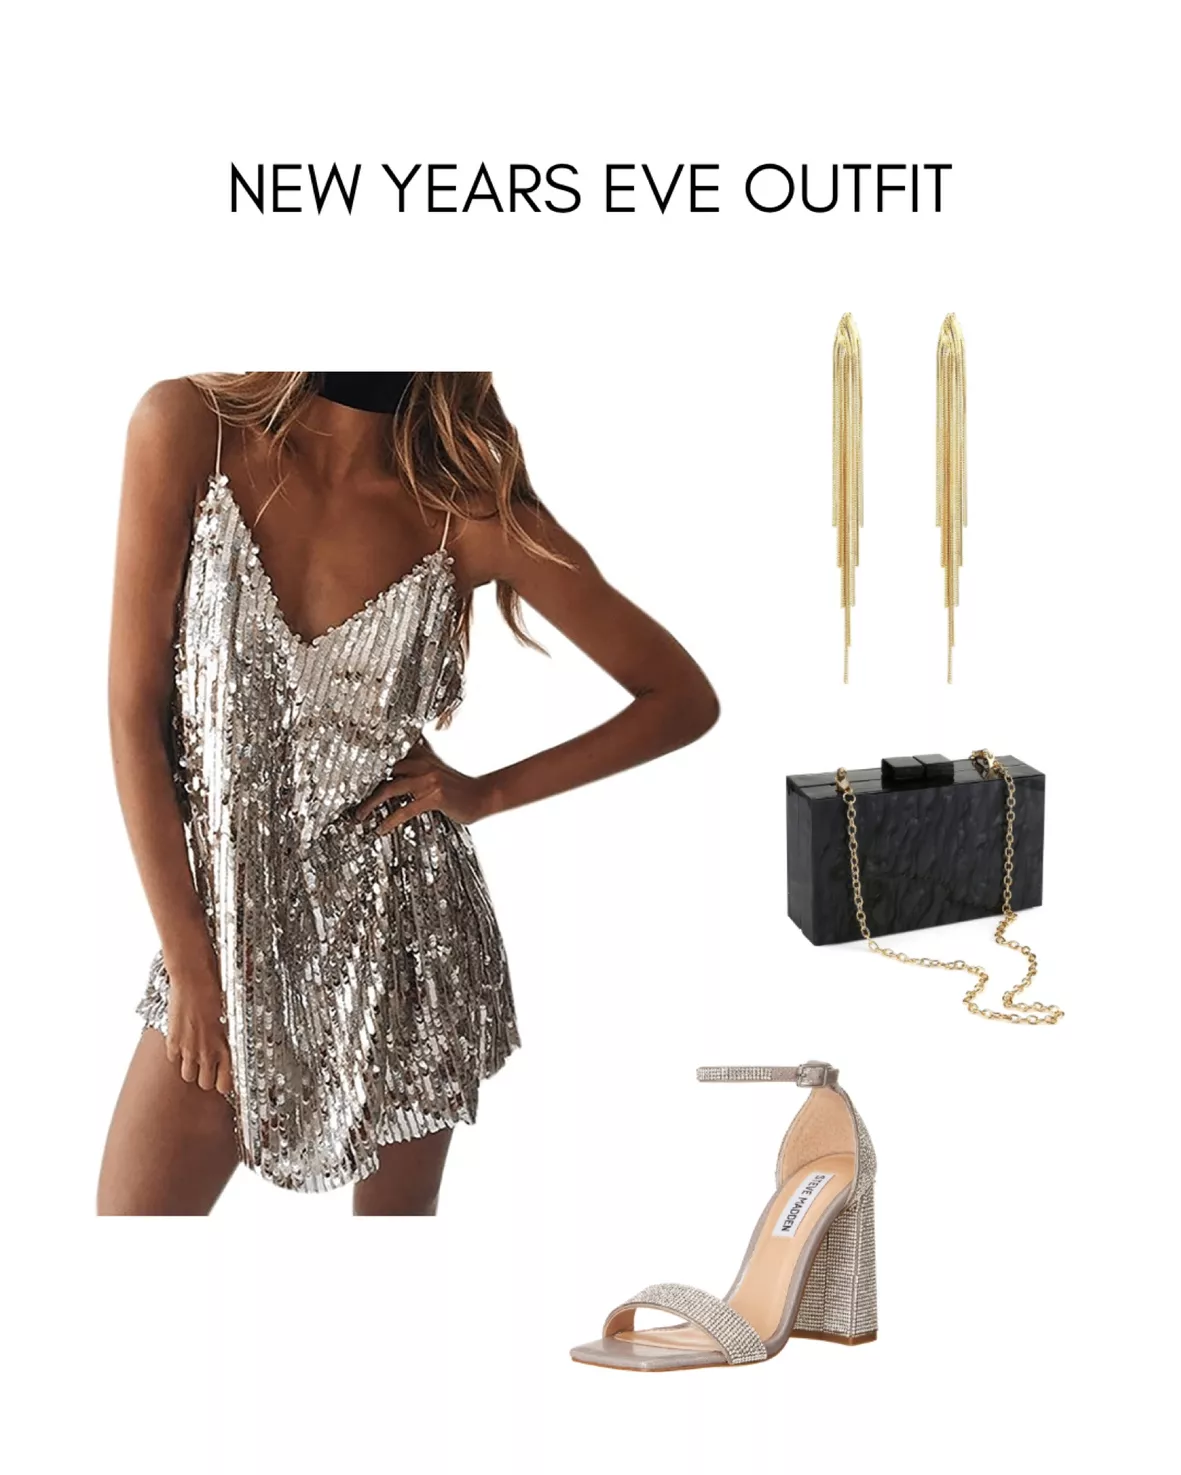 The Best Ways To Remove Your New Year's Eve Body Glitter, According to  Experts - 21Ninety